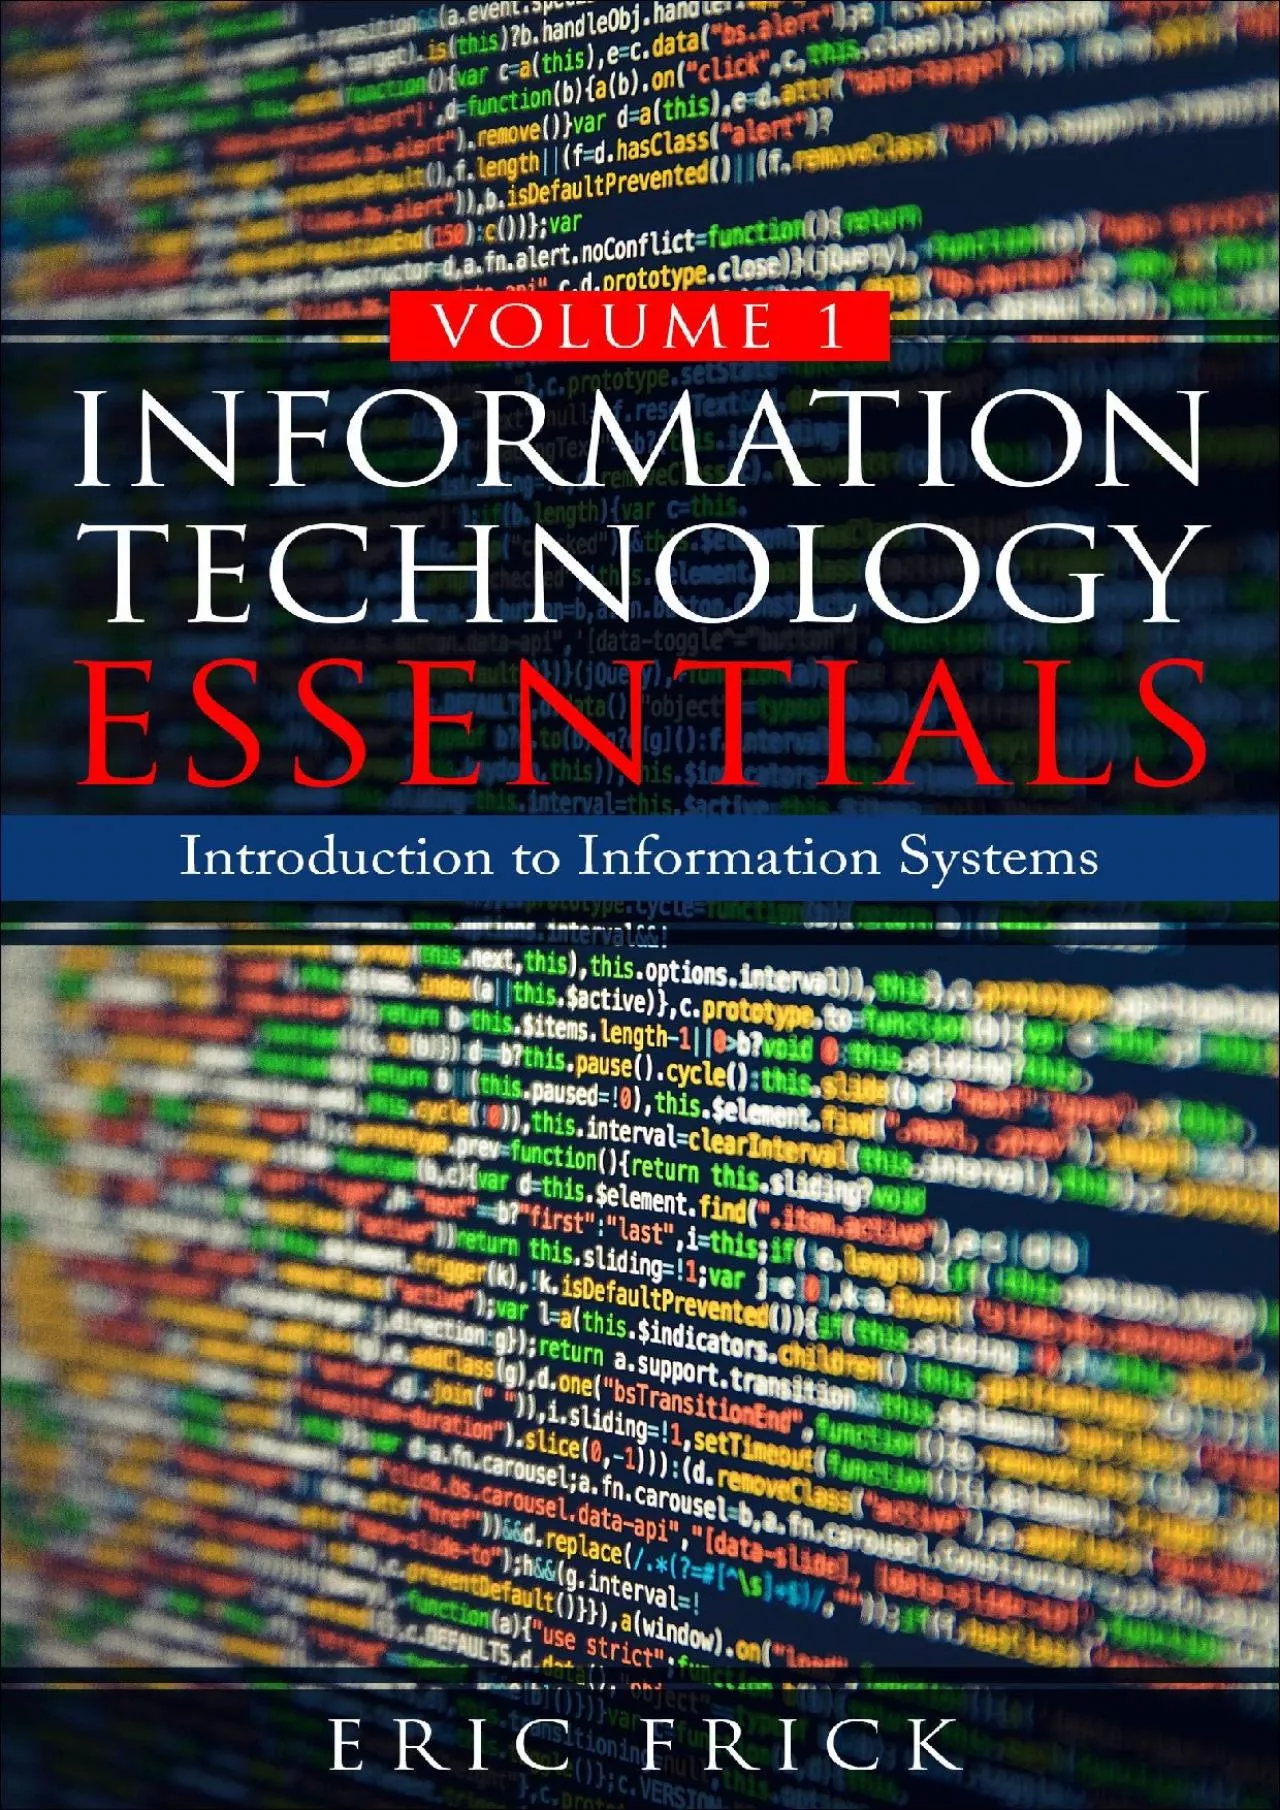 [PDF]-Information Technology Essentials Volume 1: Introduction to Information Systems